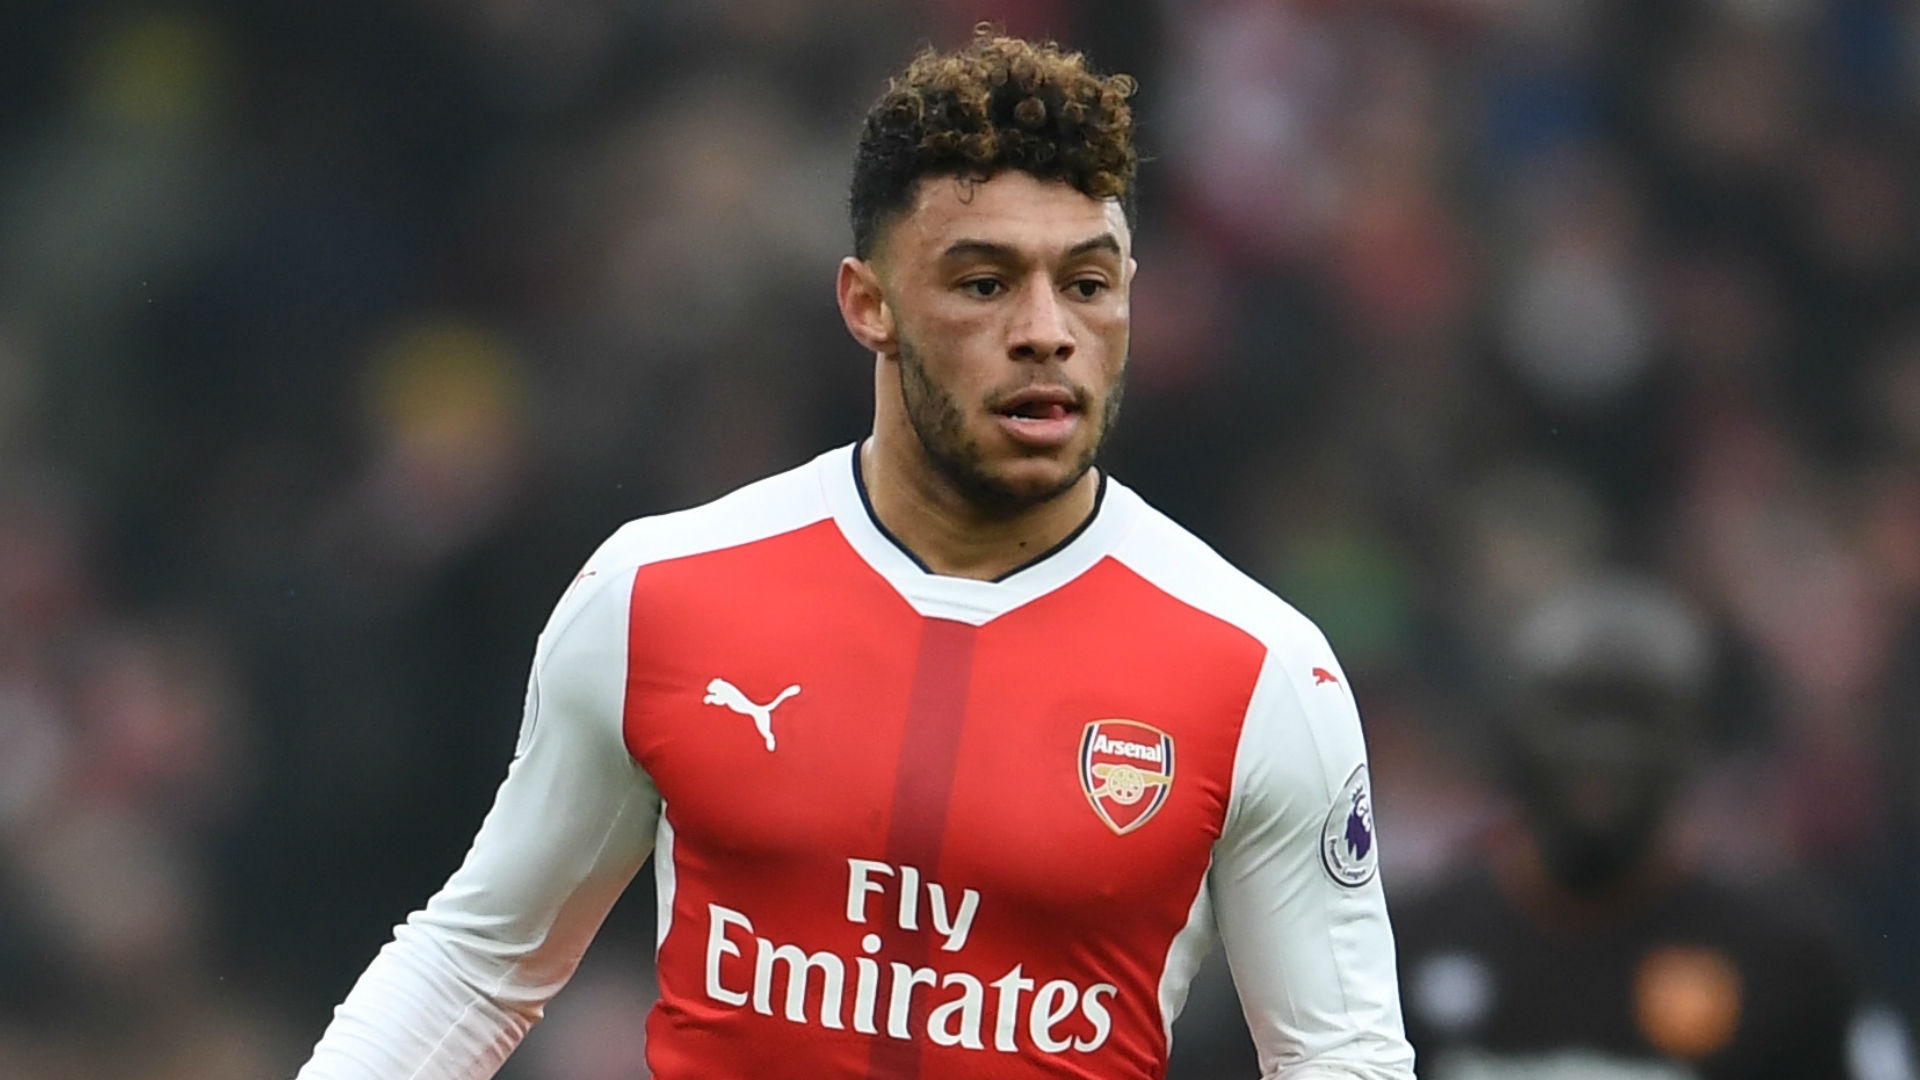 Ray Parlour, who played for the Gunners between 1992 and 2004, urges Wenger to focus on keeping Oxlade-Chamberlain at the club.